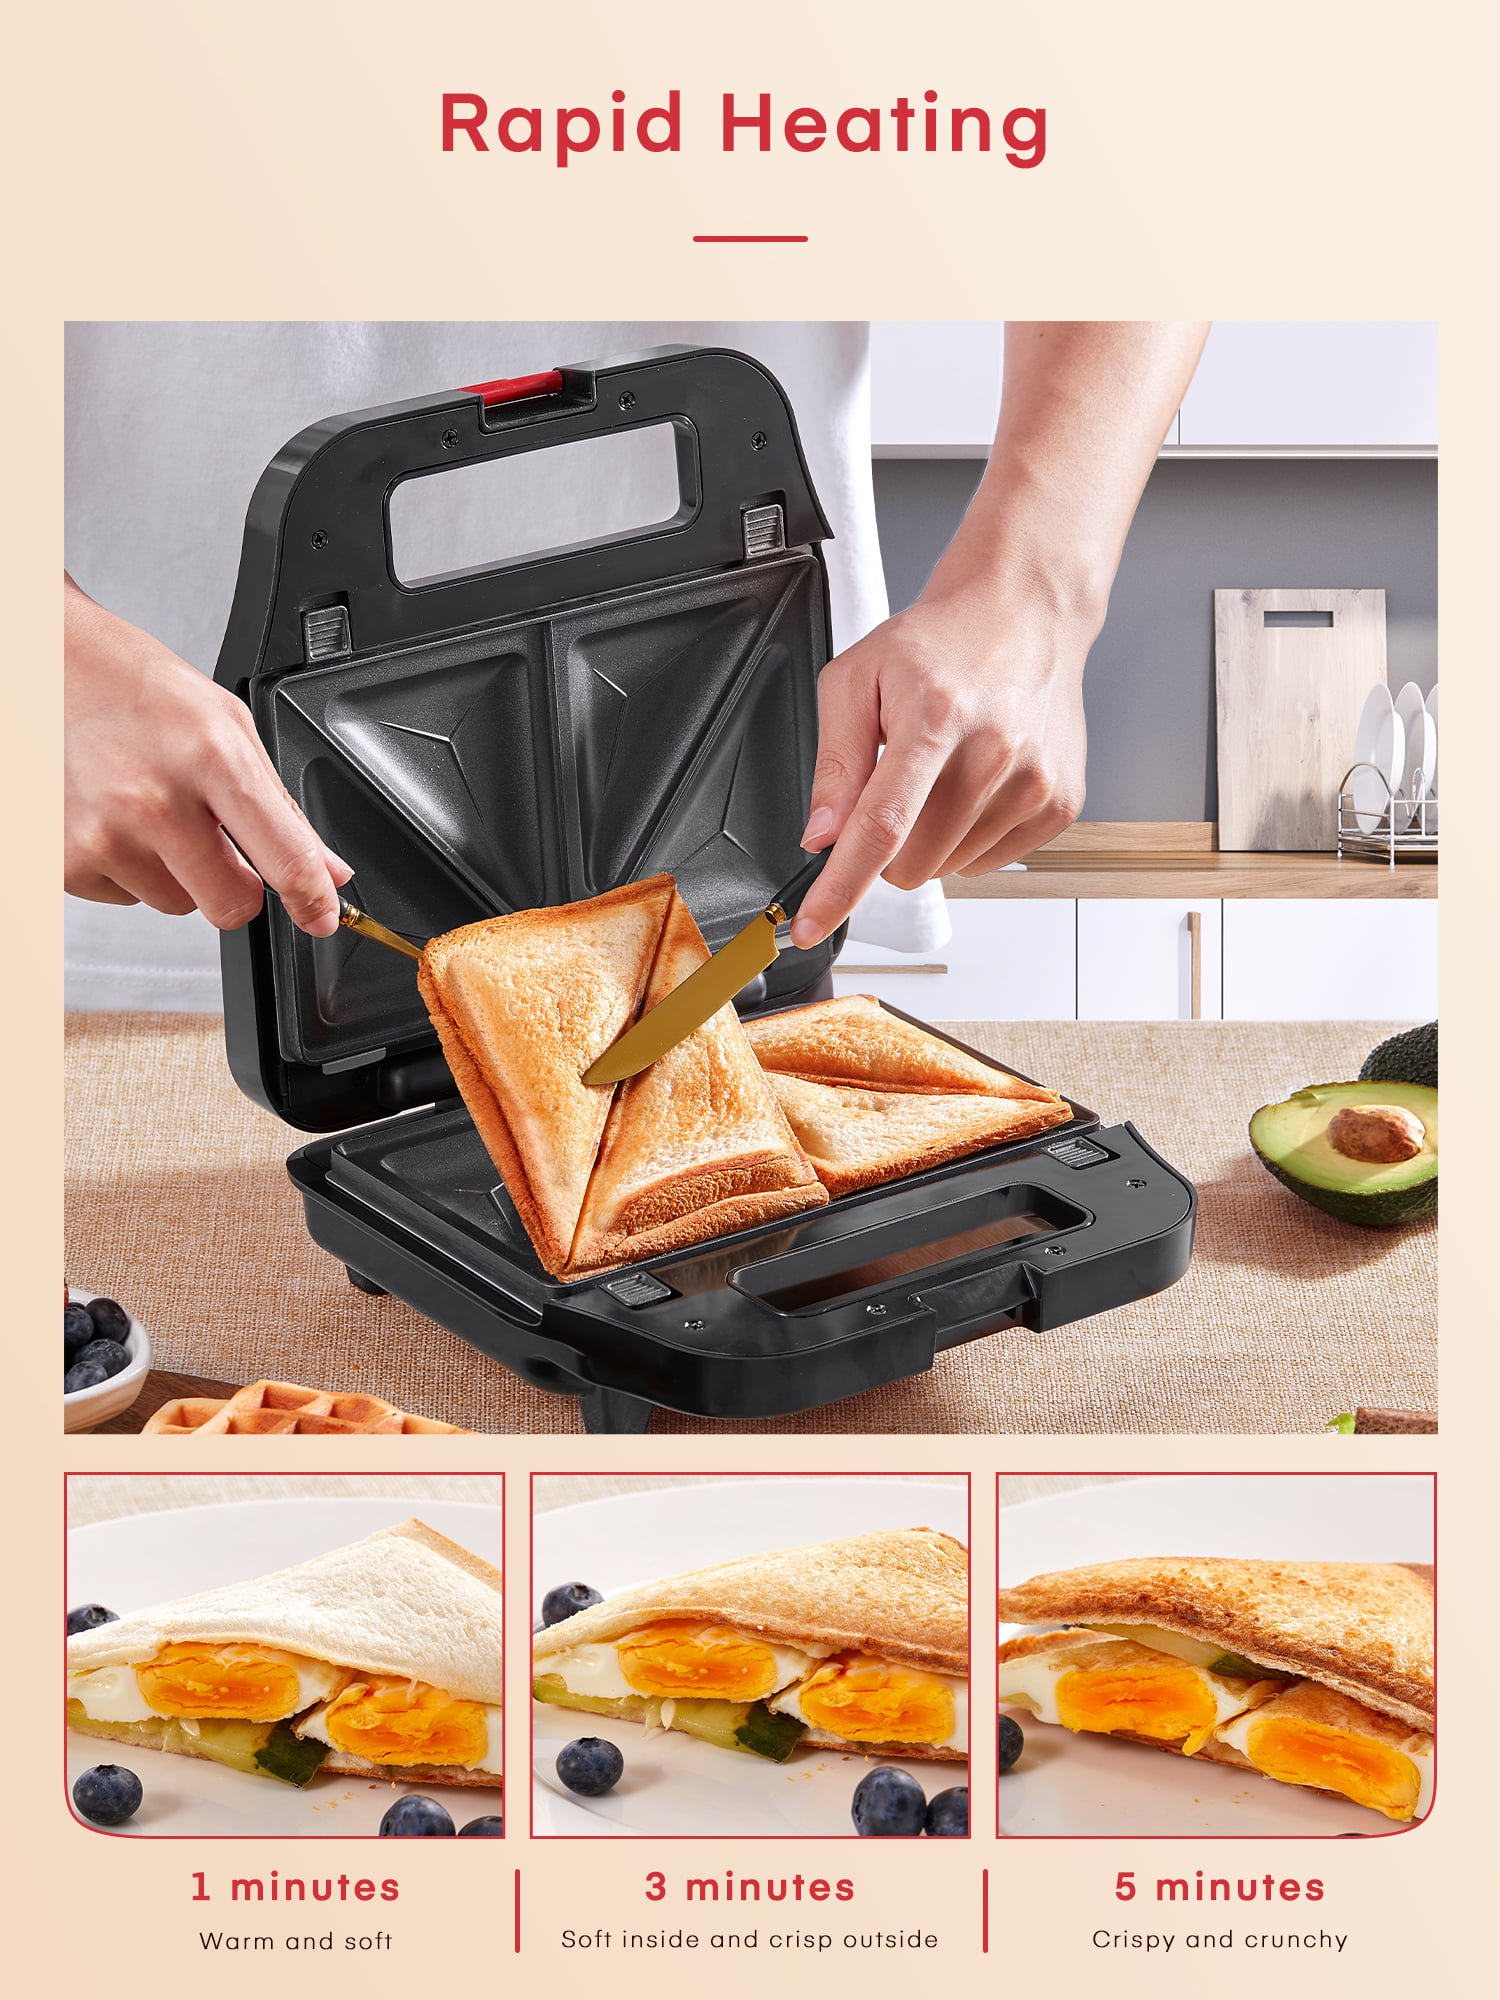 Innoteck Kitchen Pro 3 in 1 Sandwich Maker For Family Size 4 Slices Waffles Sandwiches and Grilling Modern Diamond Pattern Design with 3 Detachable Non-stick plates 